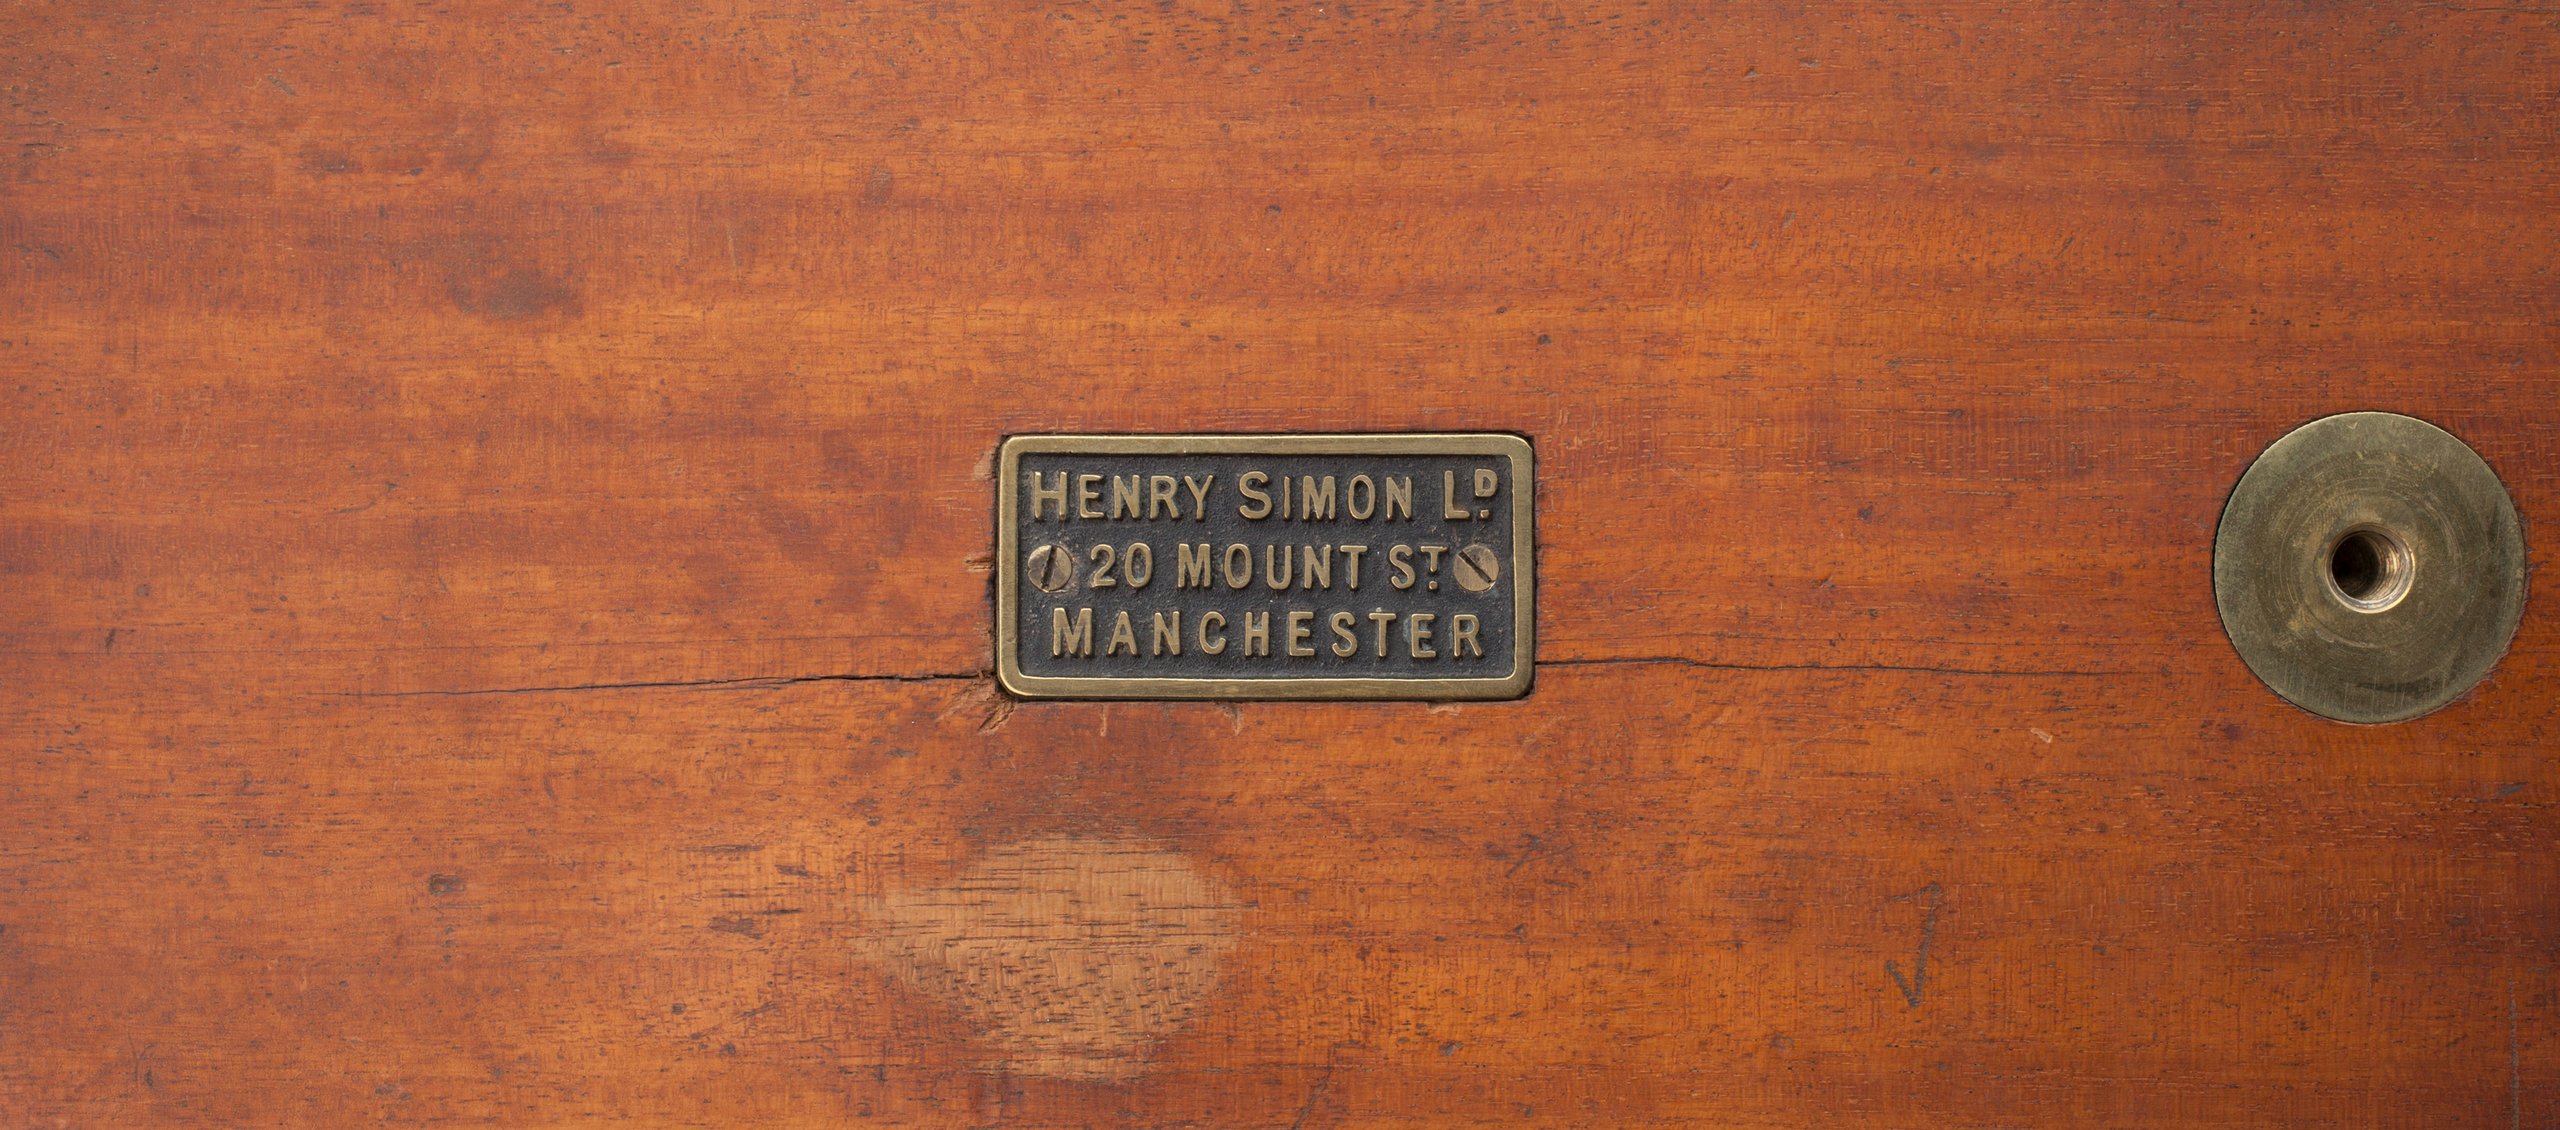 Wooden box containing instruments made by Henry Simon Ltd